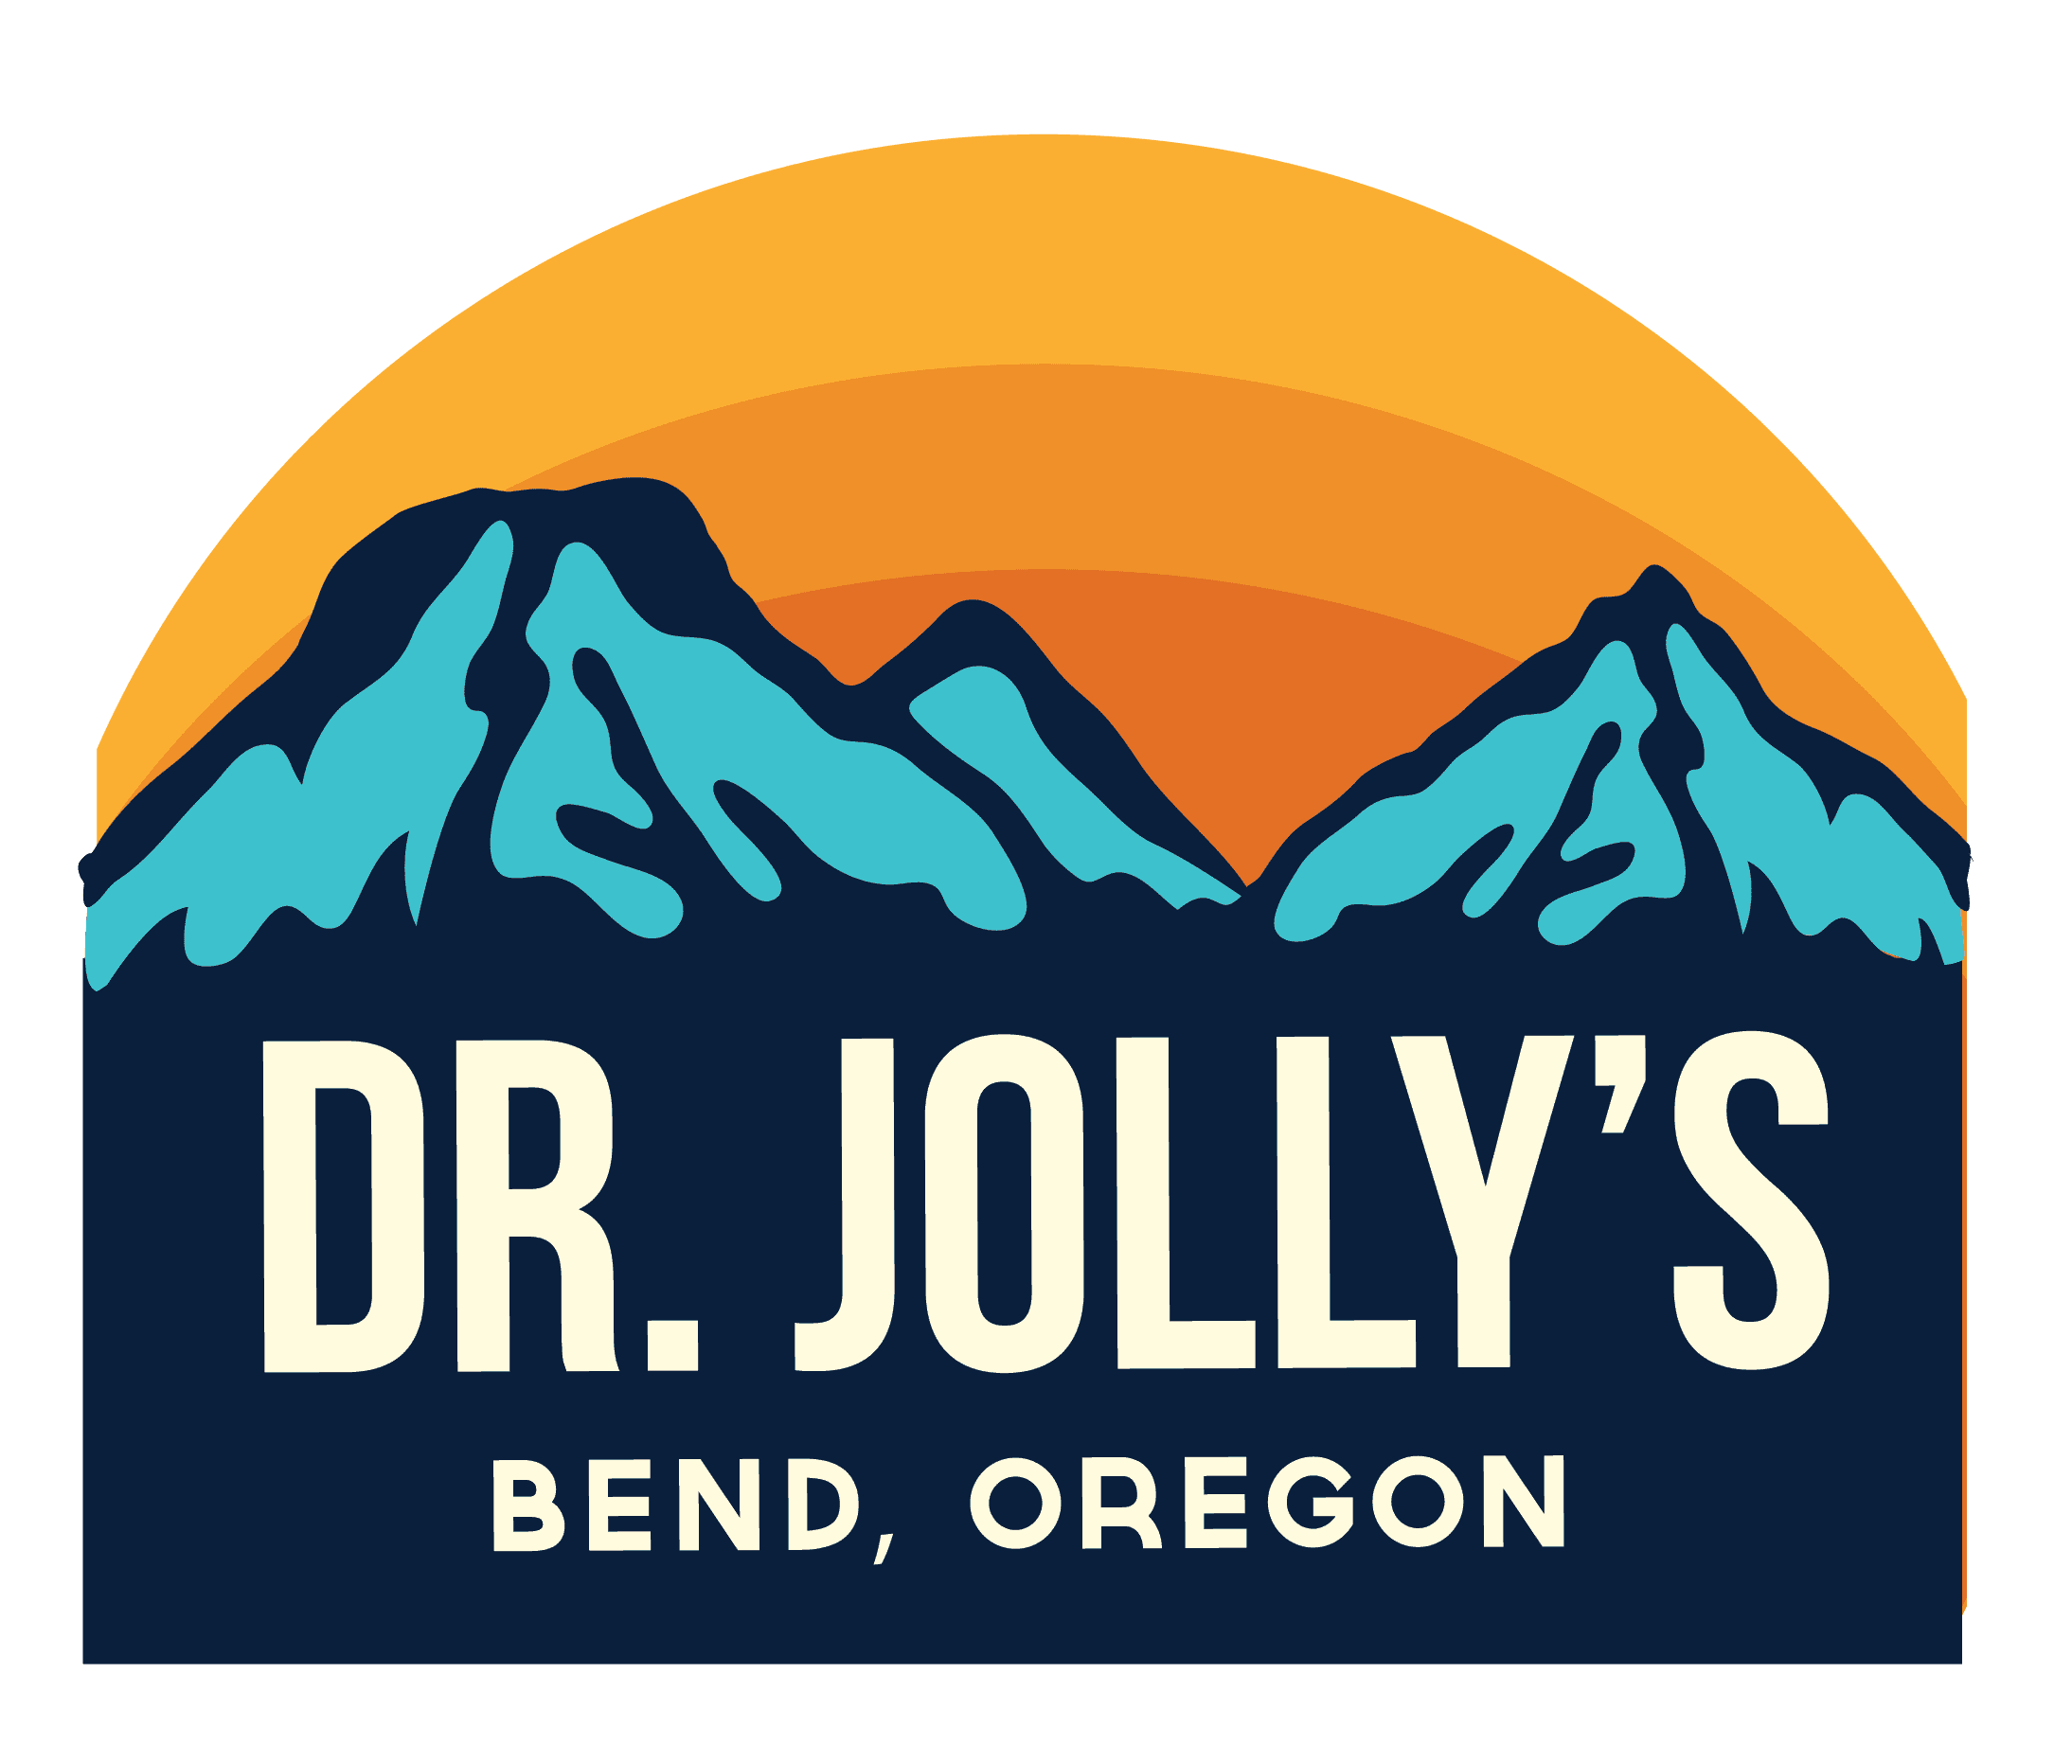 Dr. Jolly's Extracts